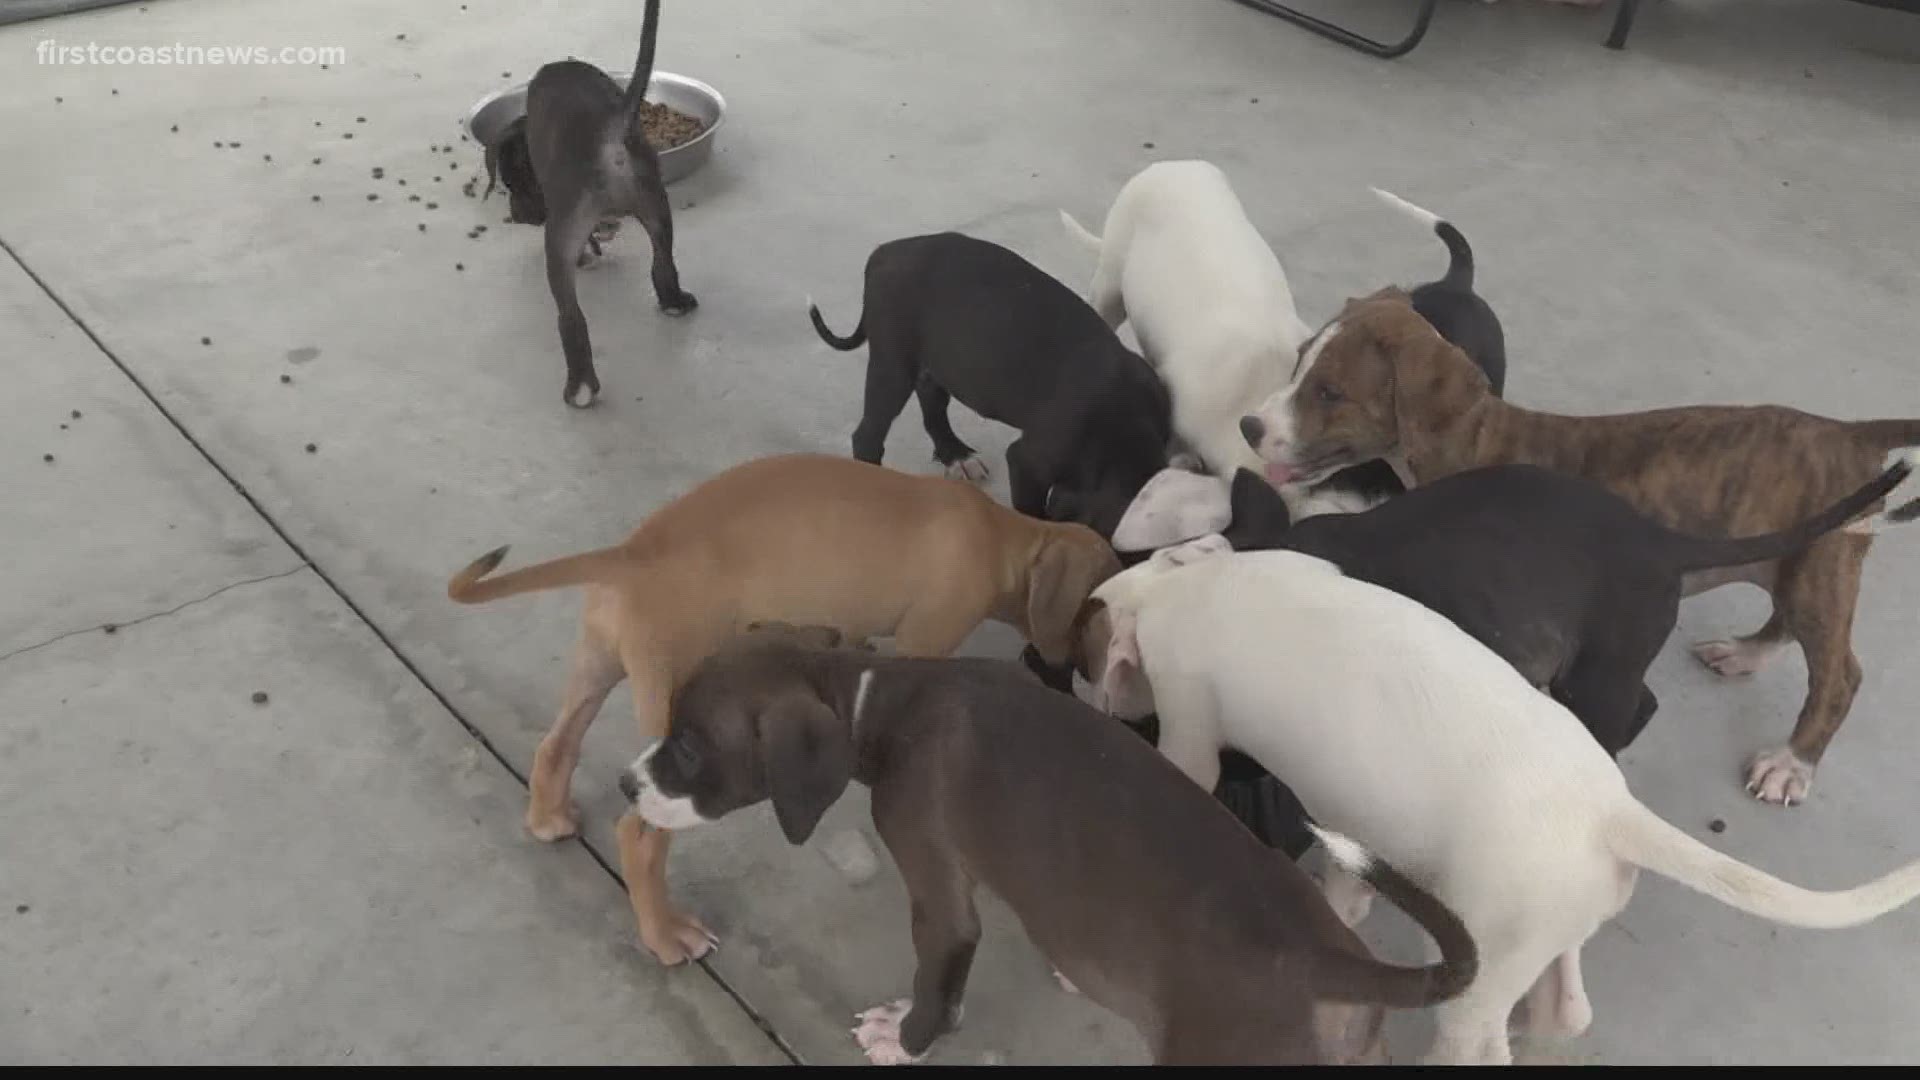 All 11 puppies and their mother miraculously survived after a man driving by Griffin Road in Callahan heard their cries and took their crate to the shelter.